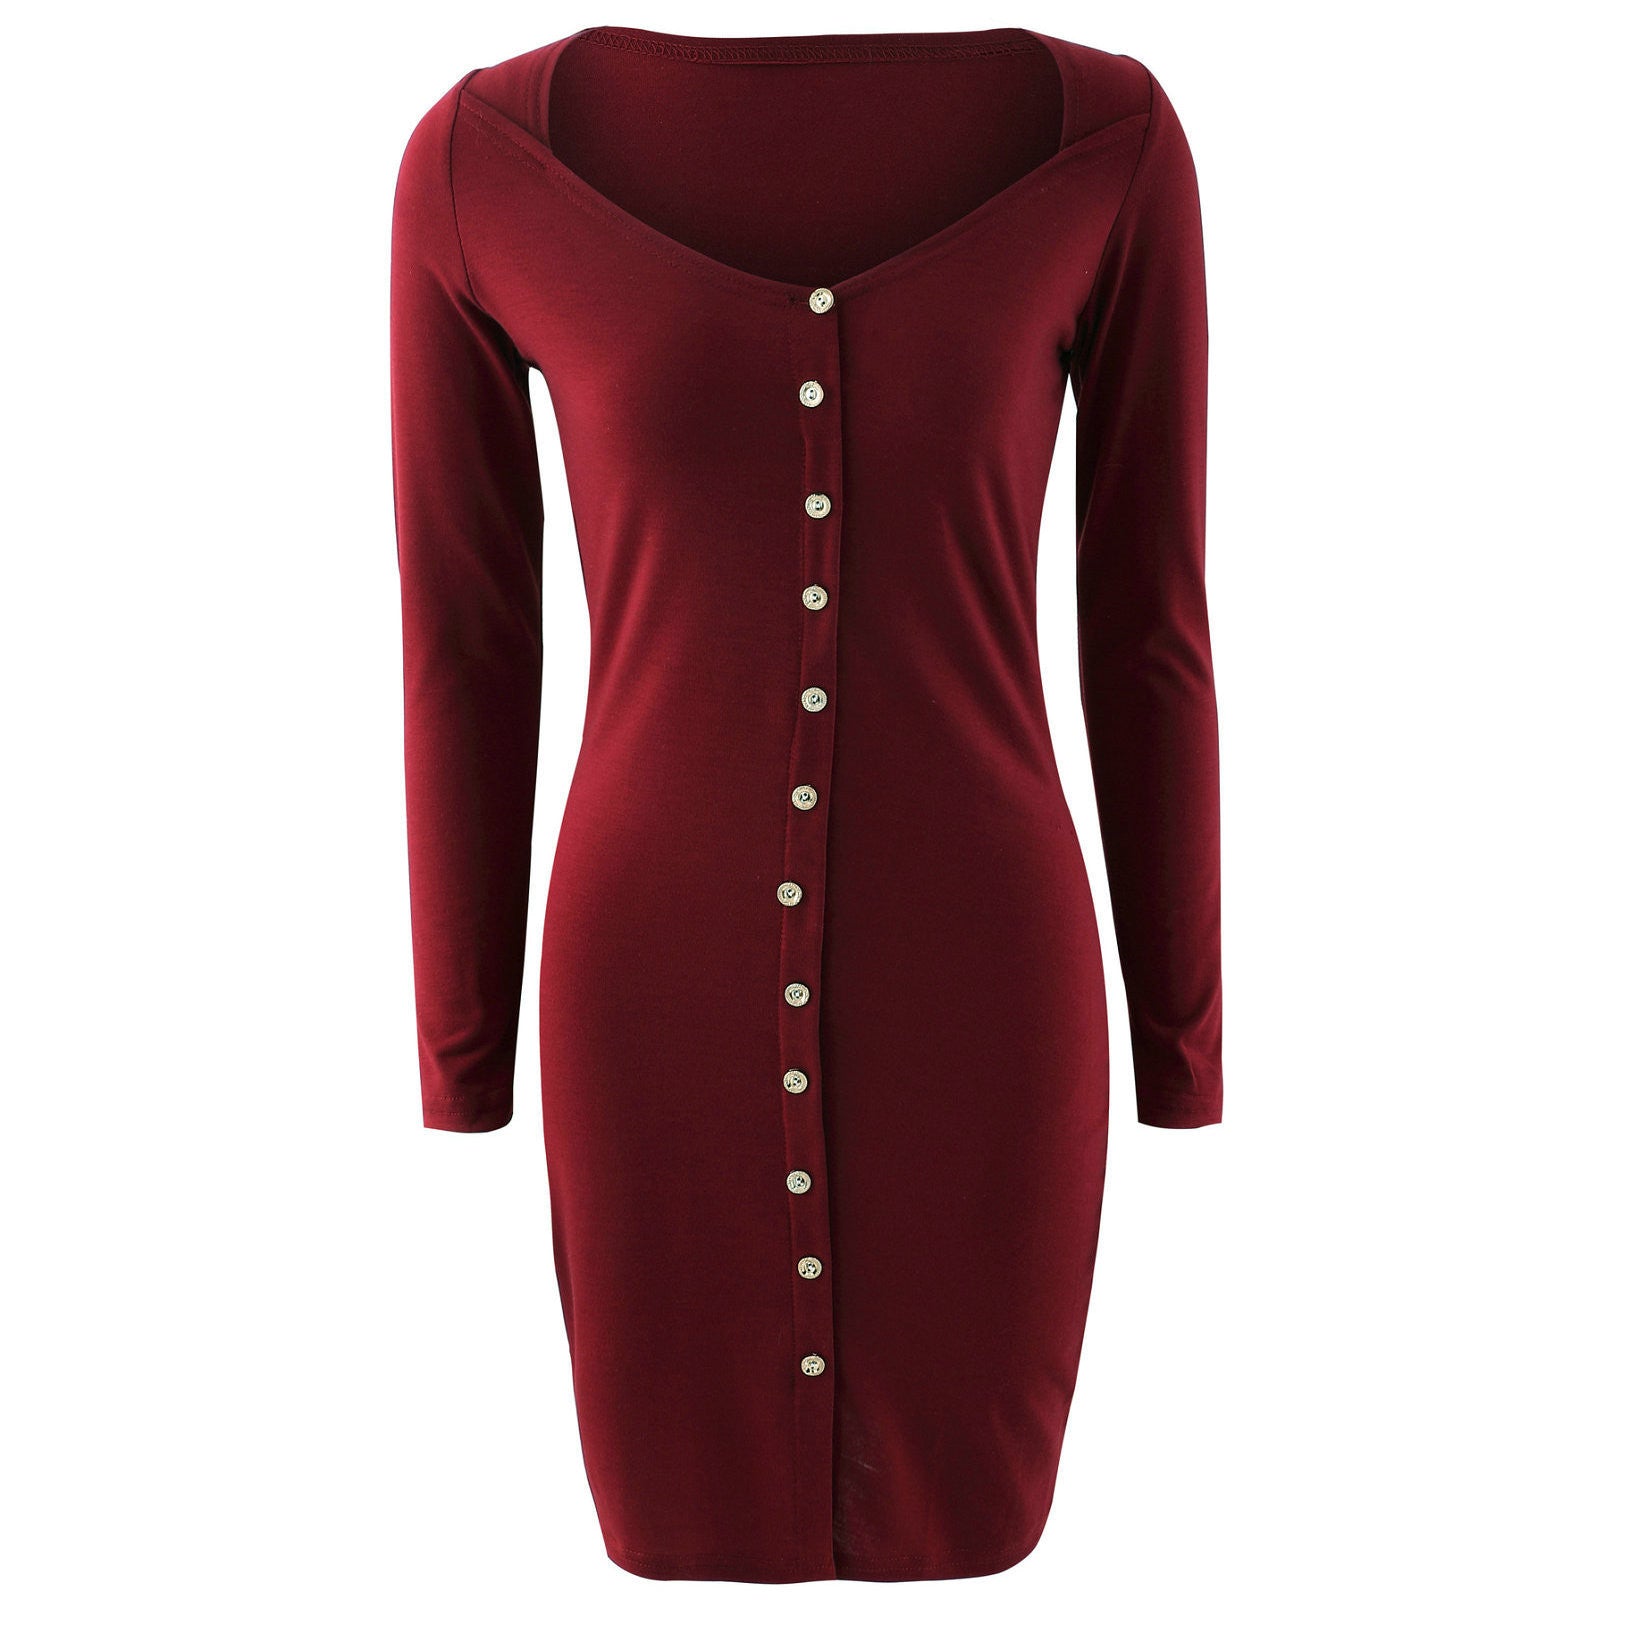 Sexy Front Button Square Neck Short Bodycon Dress